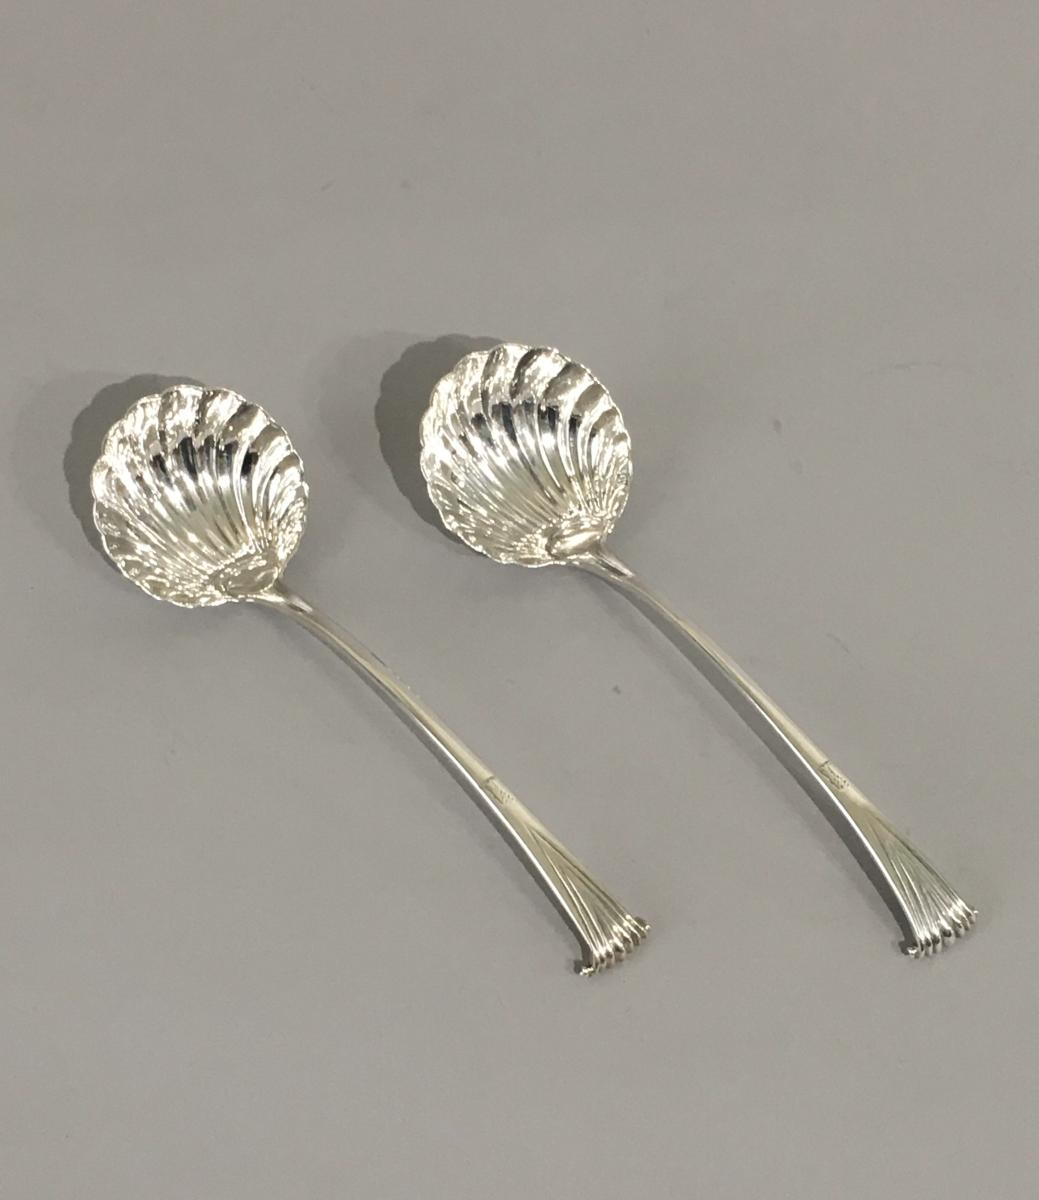 Pair of Onslow Pattern Silver Sauce Ladles. William Eley & William Fearn, London 1800